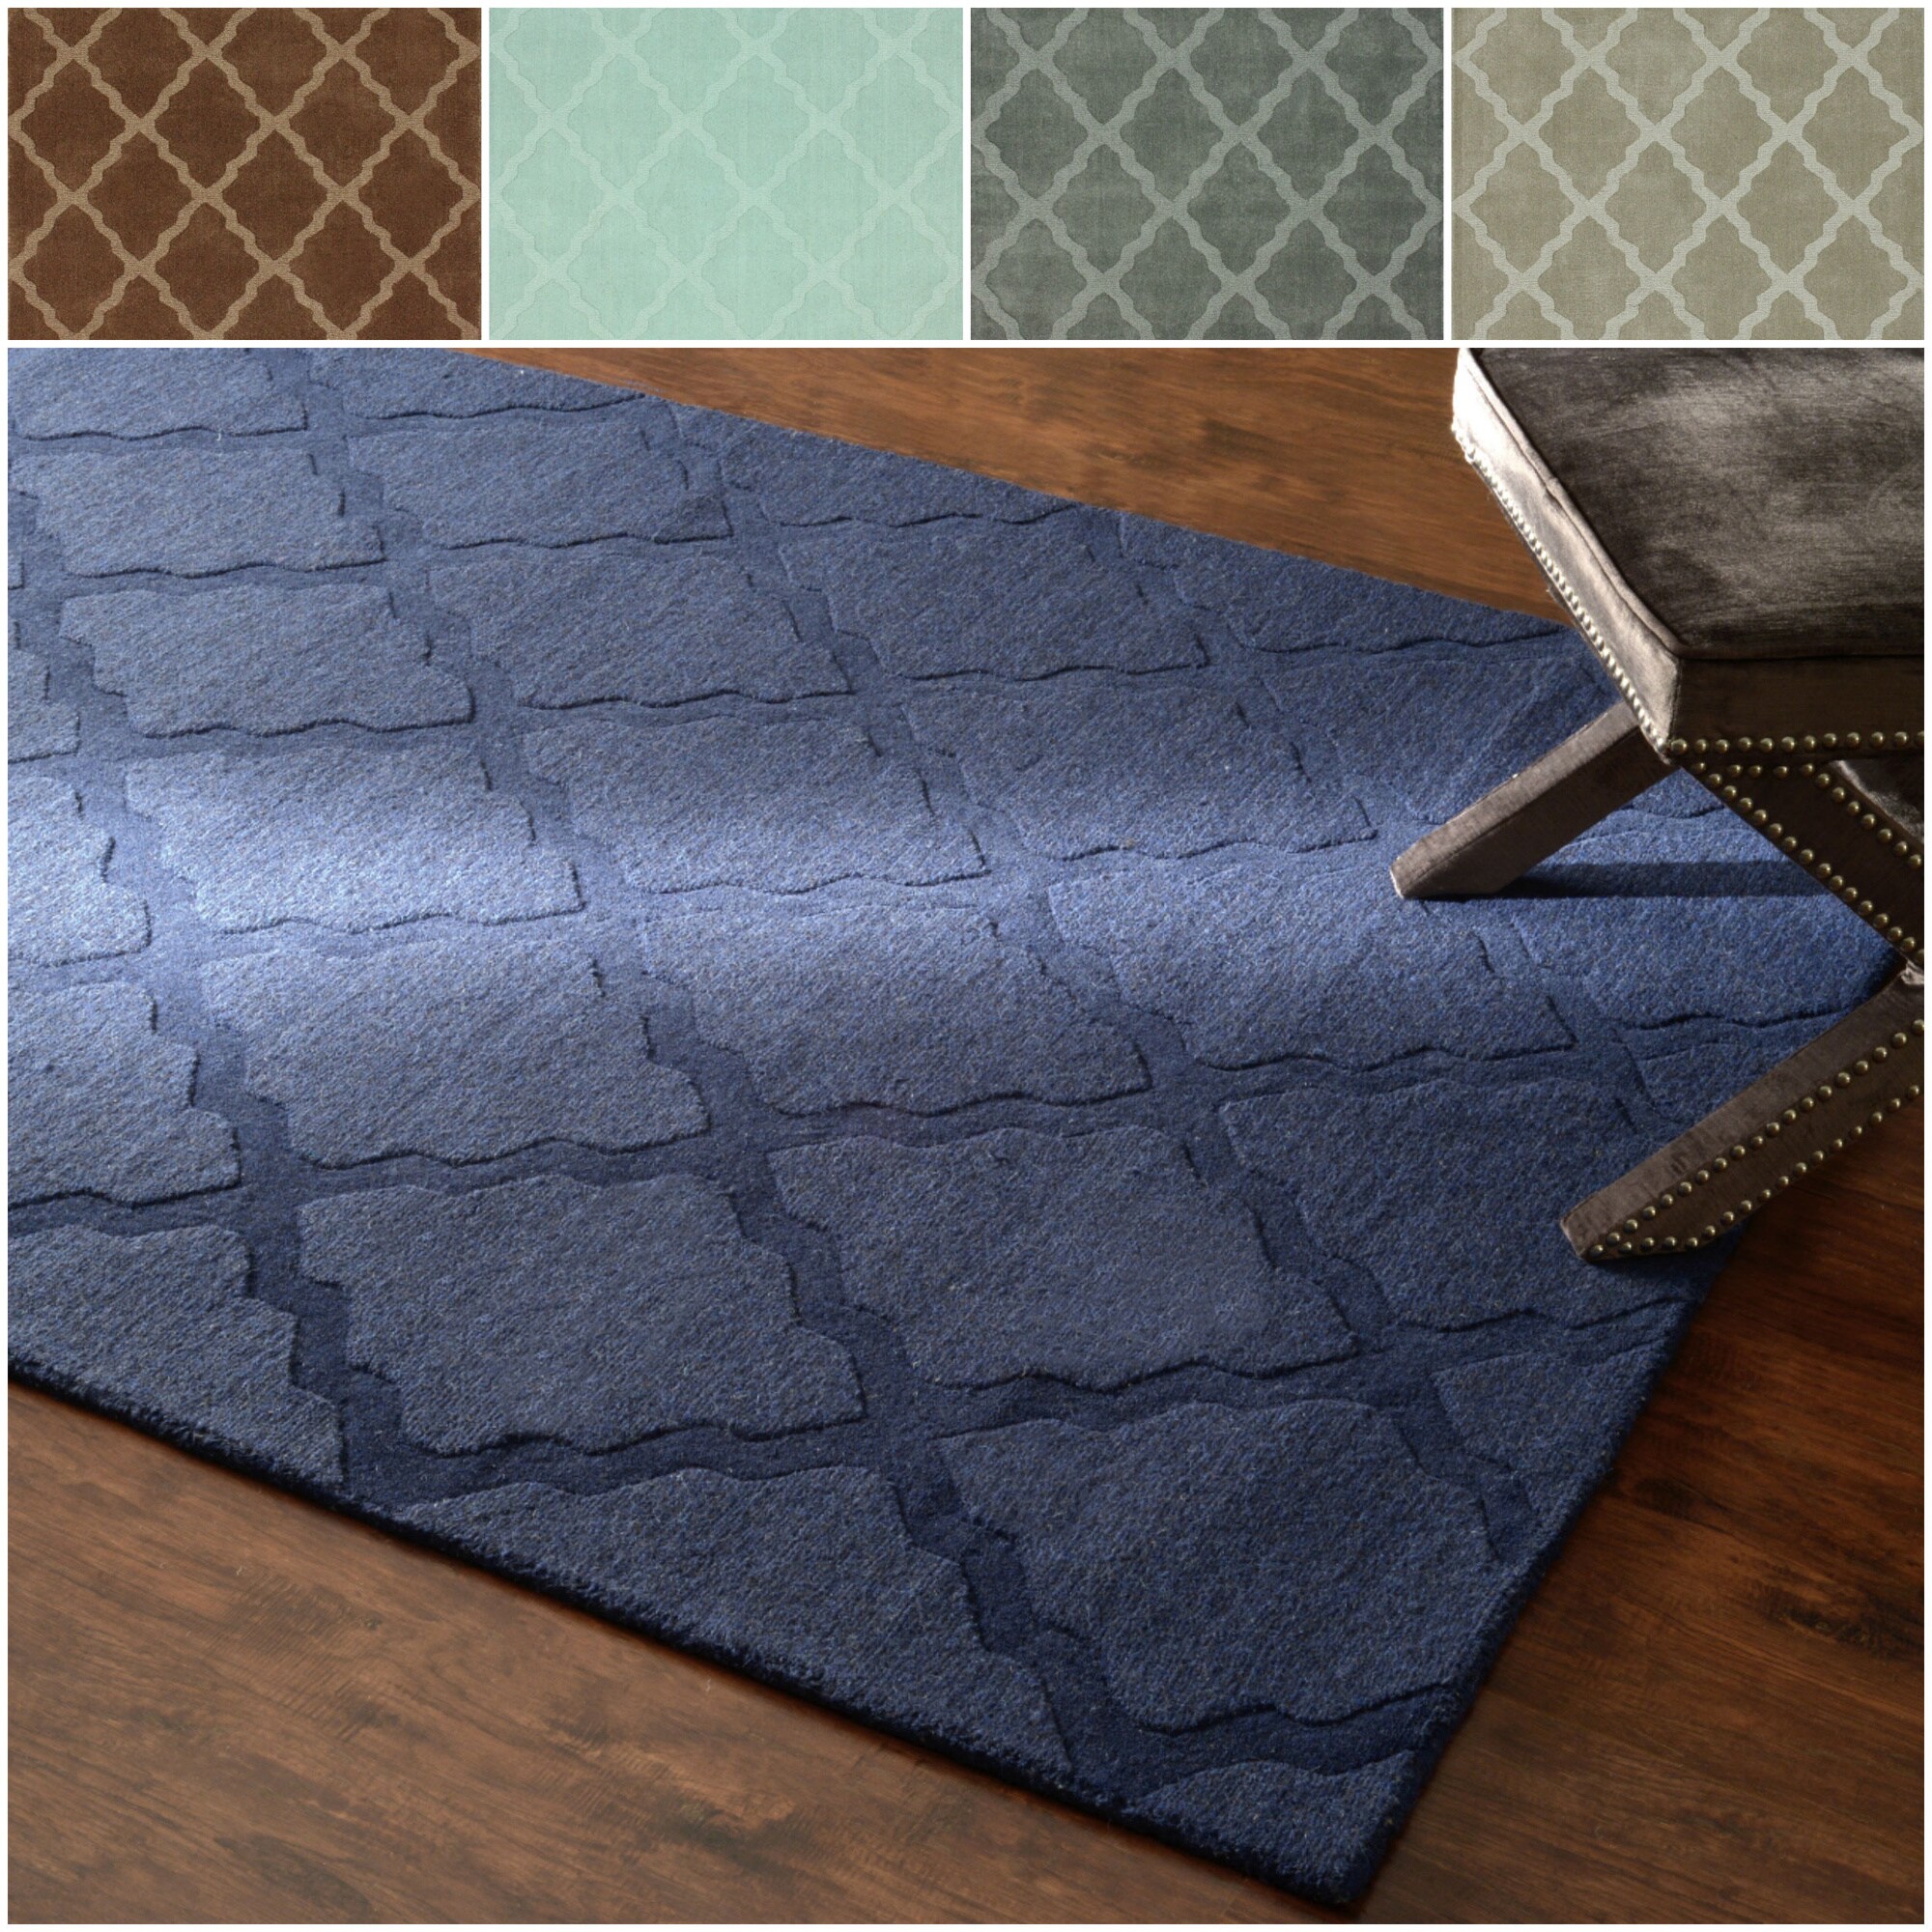 Nuloom Handmade Moroccan Trellis Dark Grey Wool Rug (5 X 8) (GreyPattern AbstractTip We recommend the use of a non skid pad to keep the rug in place on smooth surfaces.All rug sizes are approximate. Due to the difference of monitor colors, some rug colo